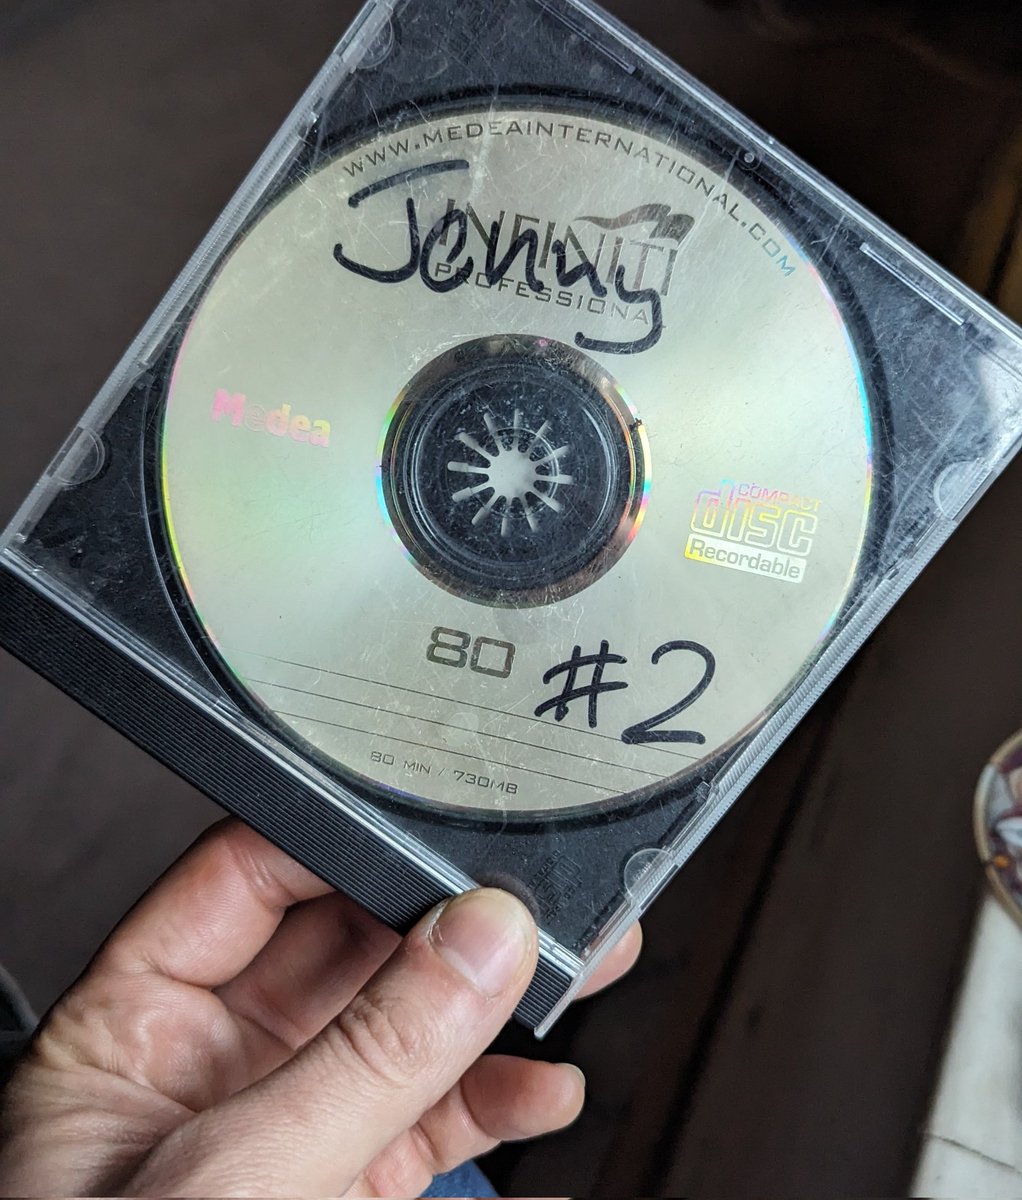 found a mix CDR on the ground outside and took it home, incredibly excited. what could be on there? favourites of mine? something new? something romantic for jenny!? it's all horrendous 90s lounge jazz. absolutely dogshit. see why jenny littered it. never being whimsical again